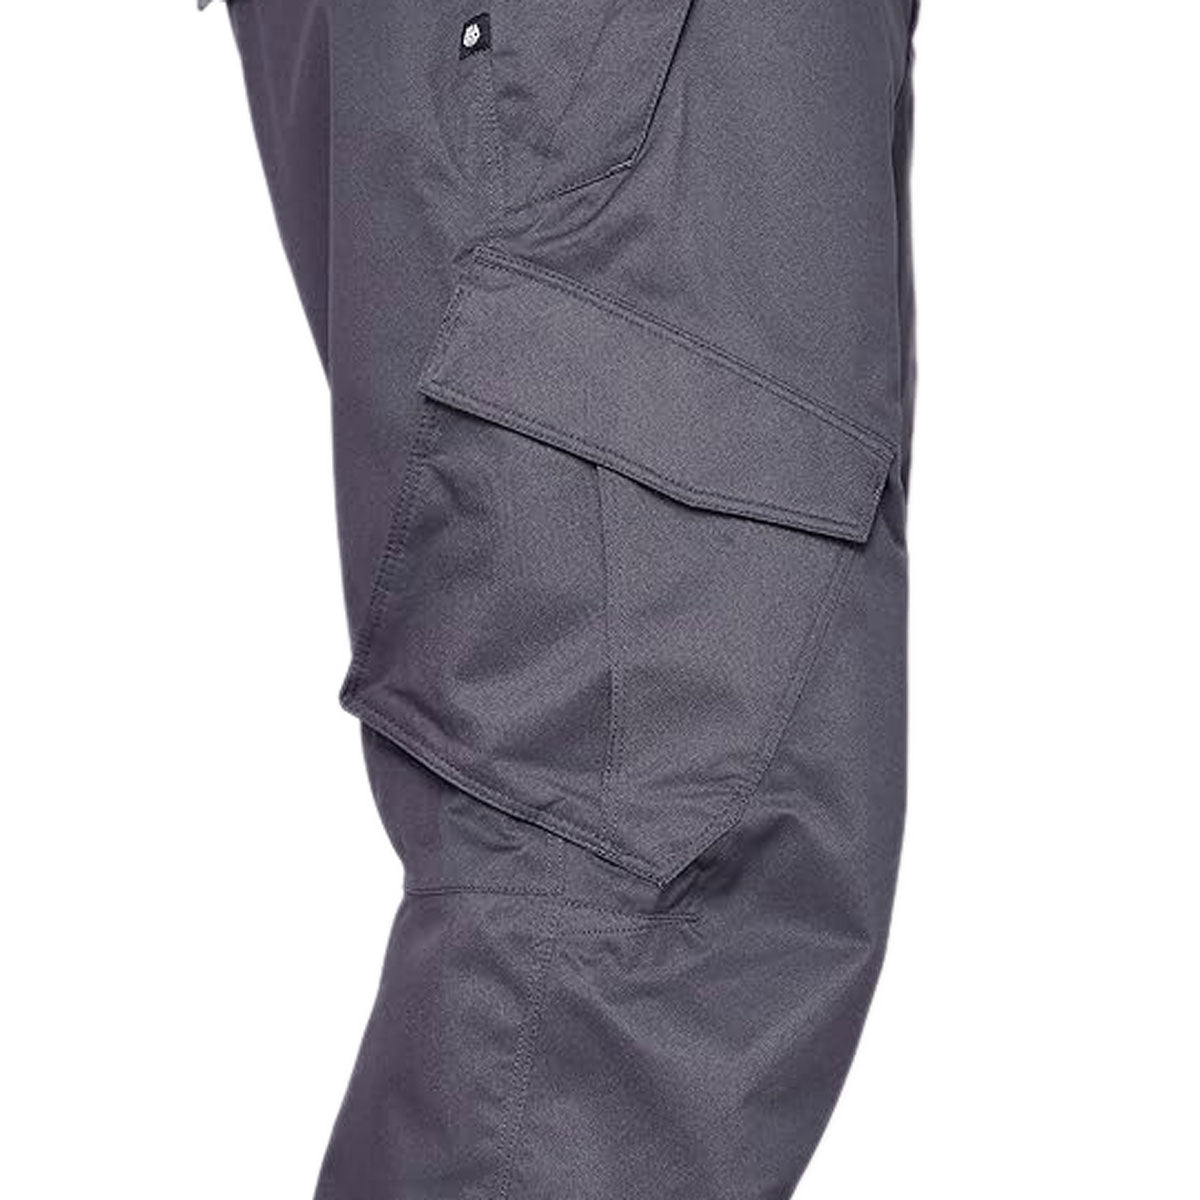 686 Infinity Insl Cargo Snowboard Pants - Charcoal image 4